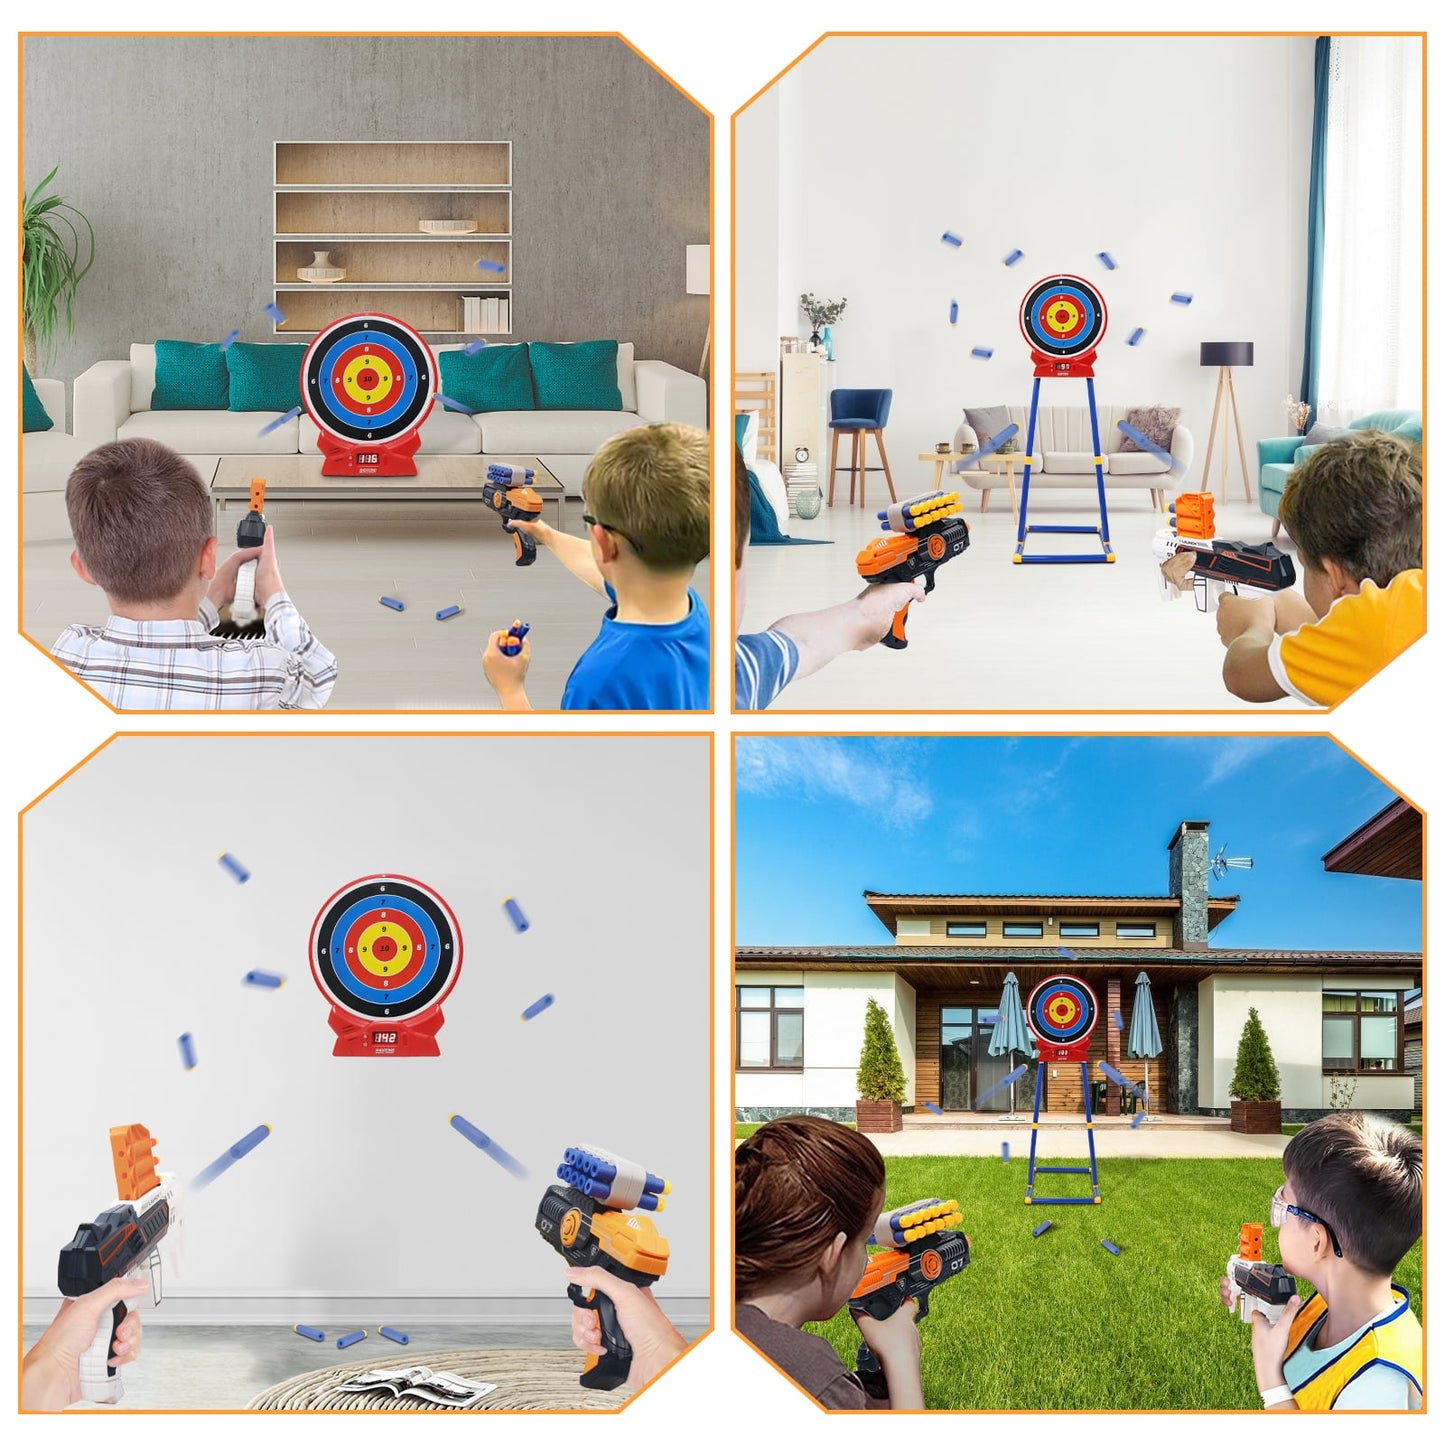 Shooting Games Outdoor Toys for Kids, Round Digital Automatic Scoring Target with 2 Foam Dart Blaster Toy for Child 5+